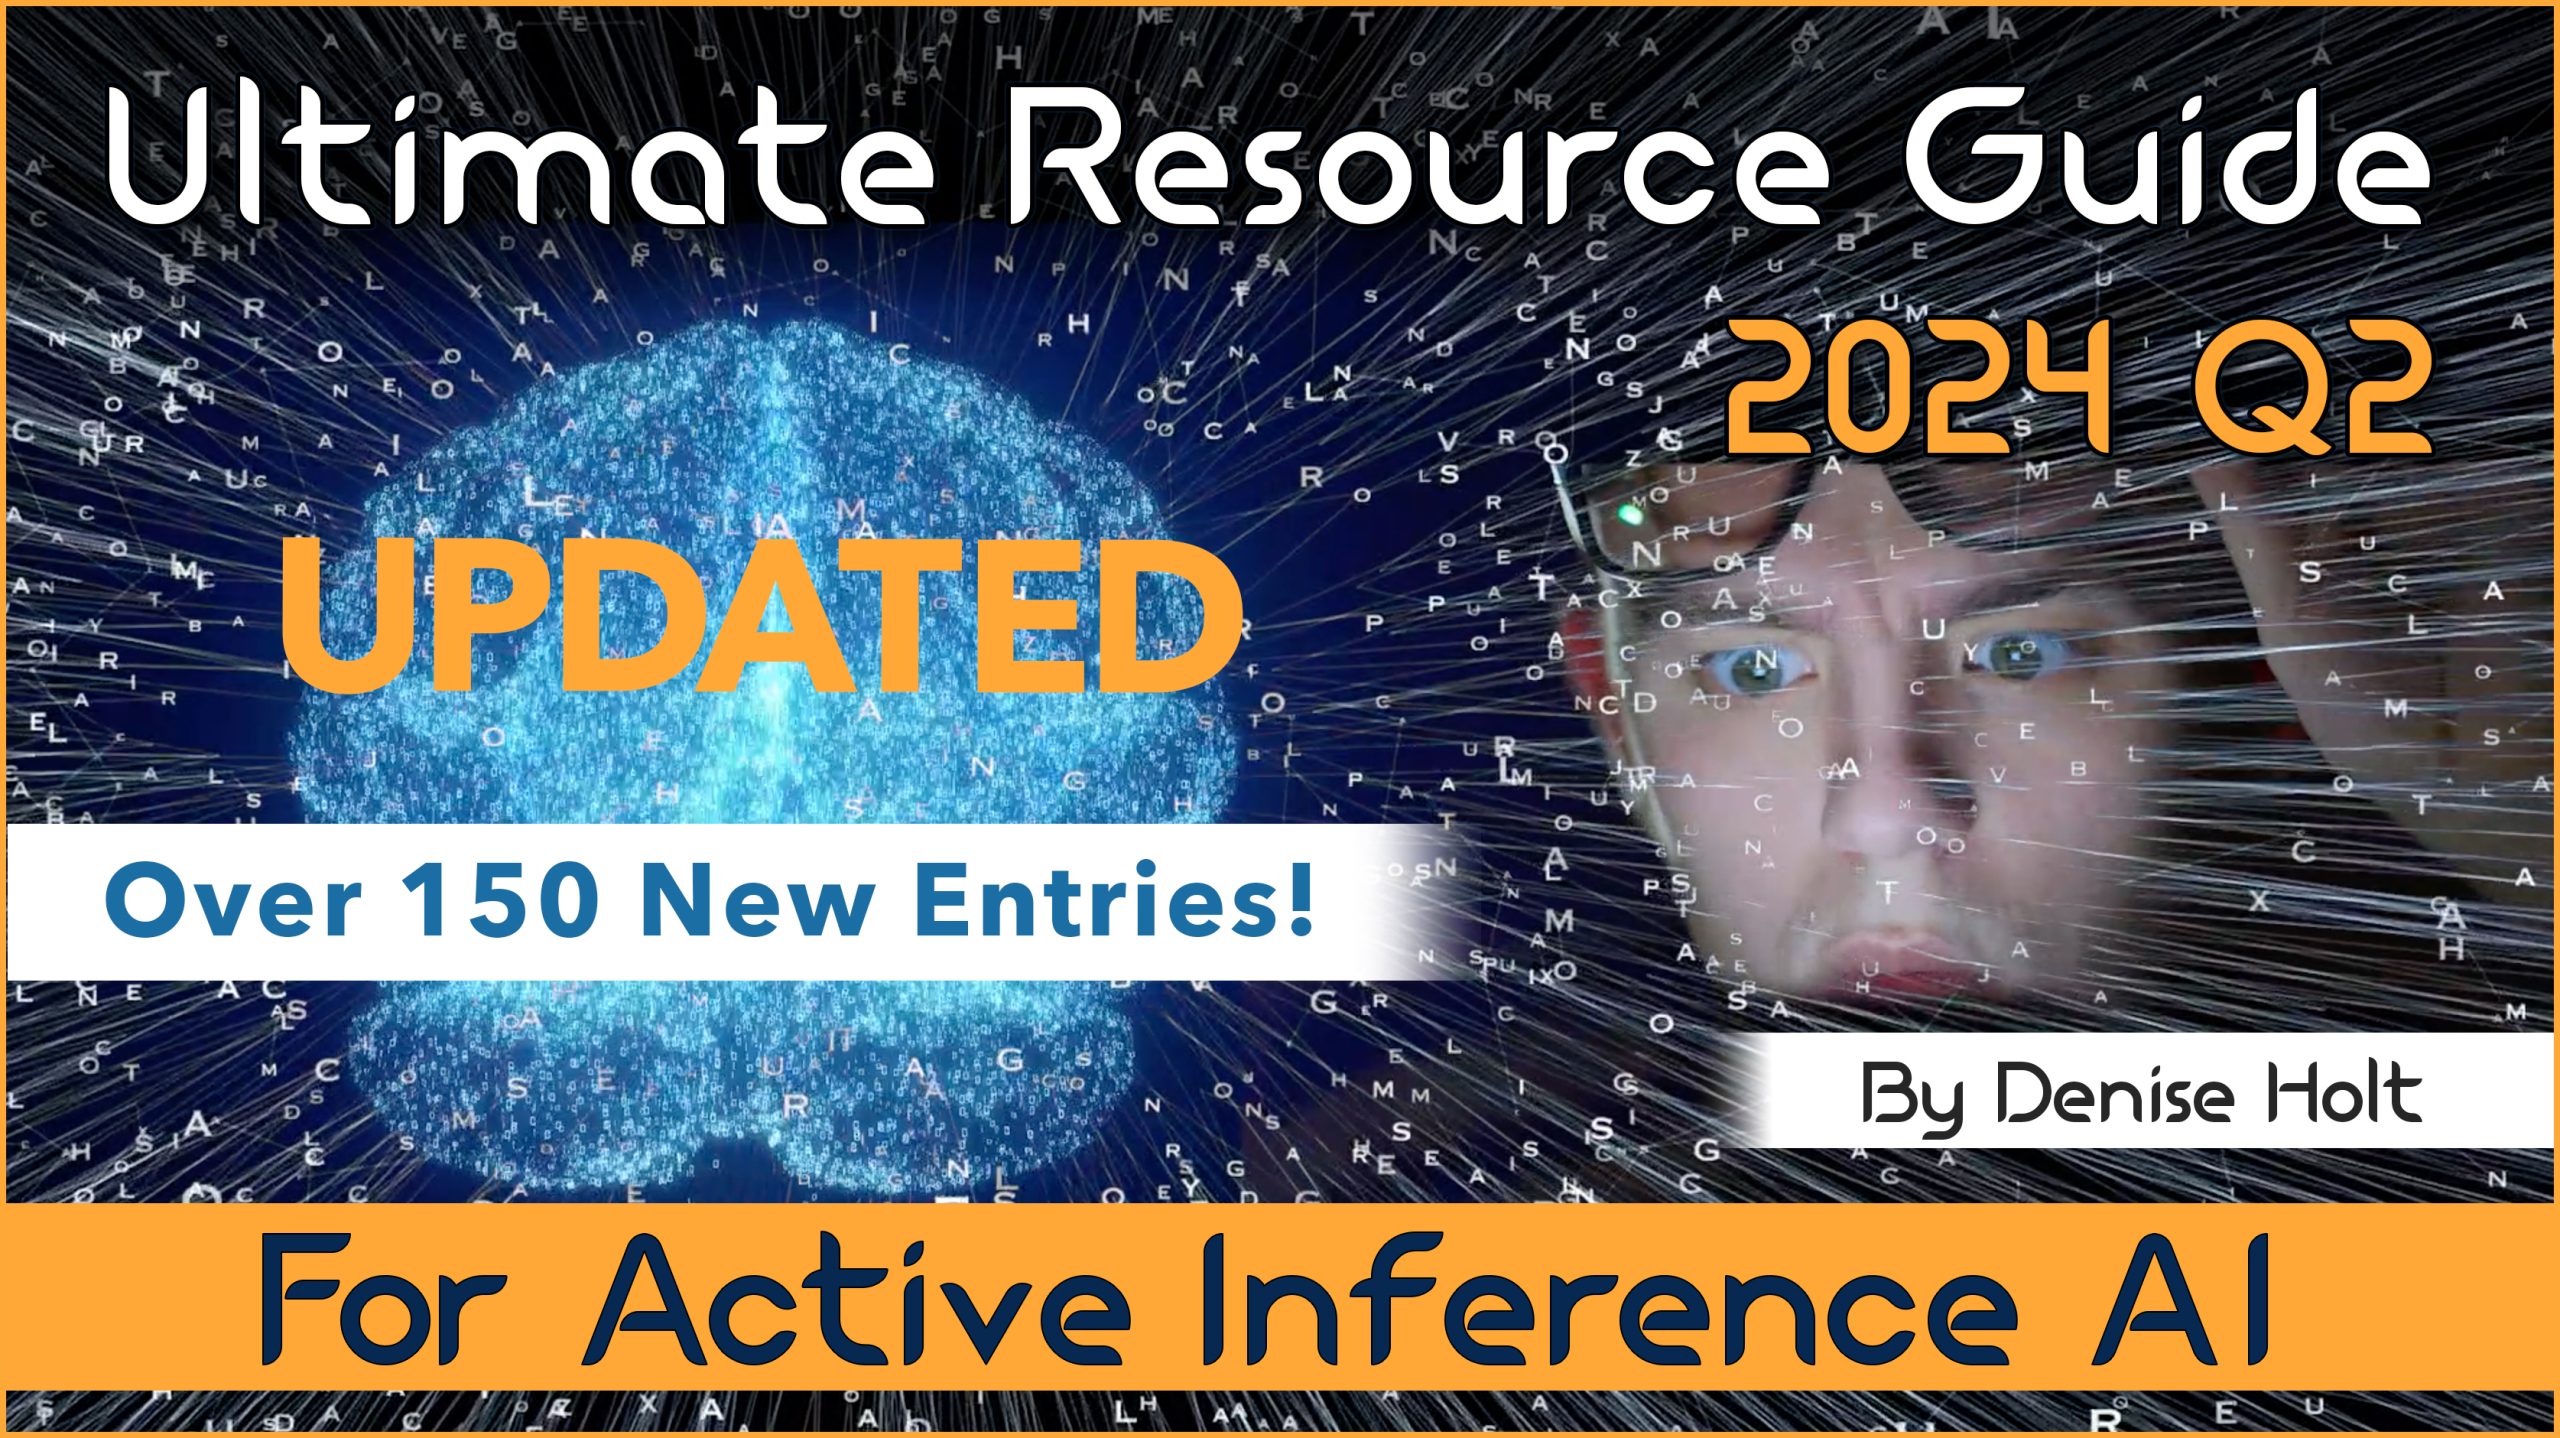 The Ultimate Resource Guide for Active Inference AI | 2024 Q2 Update